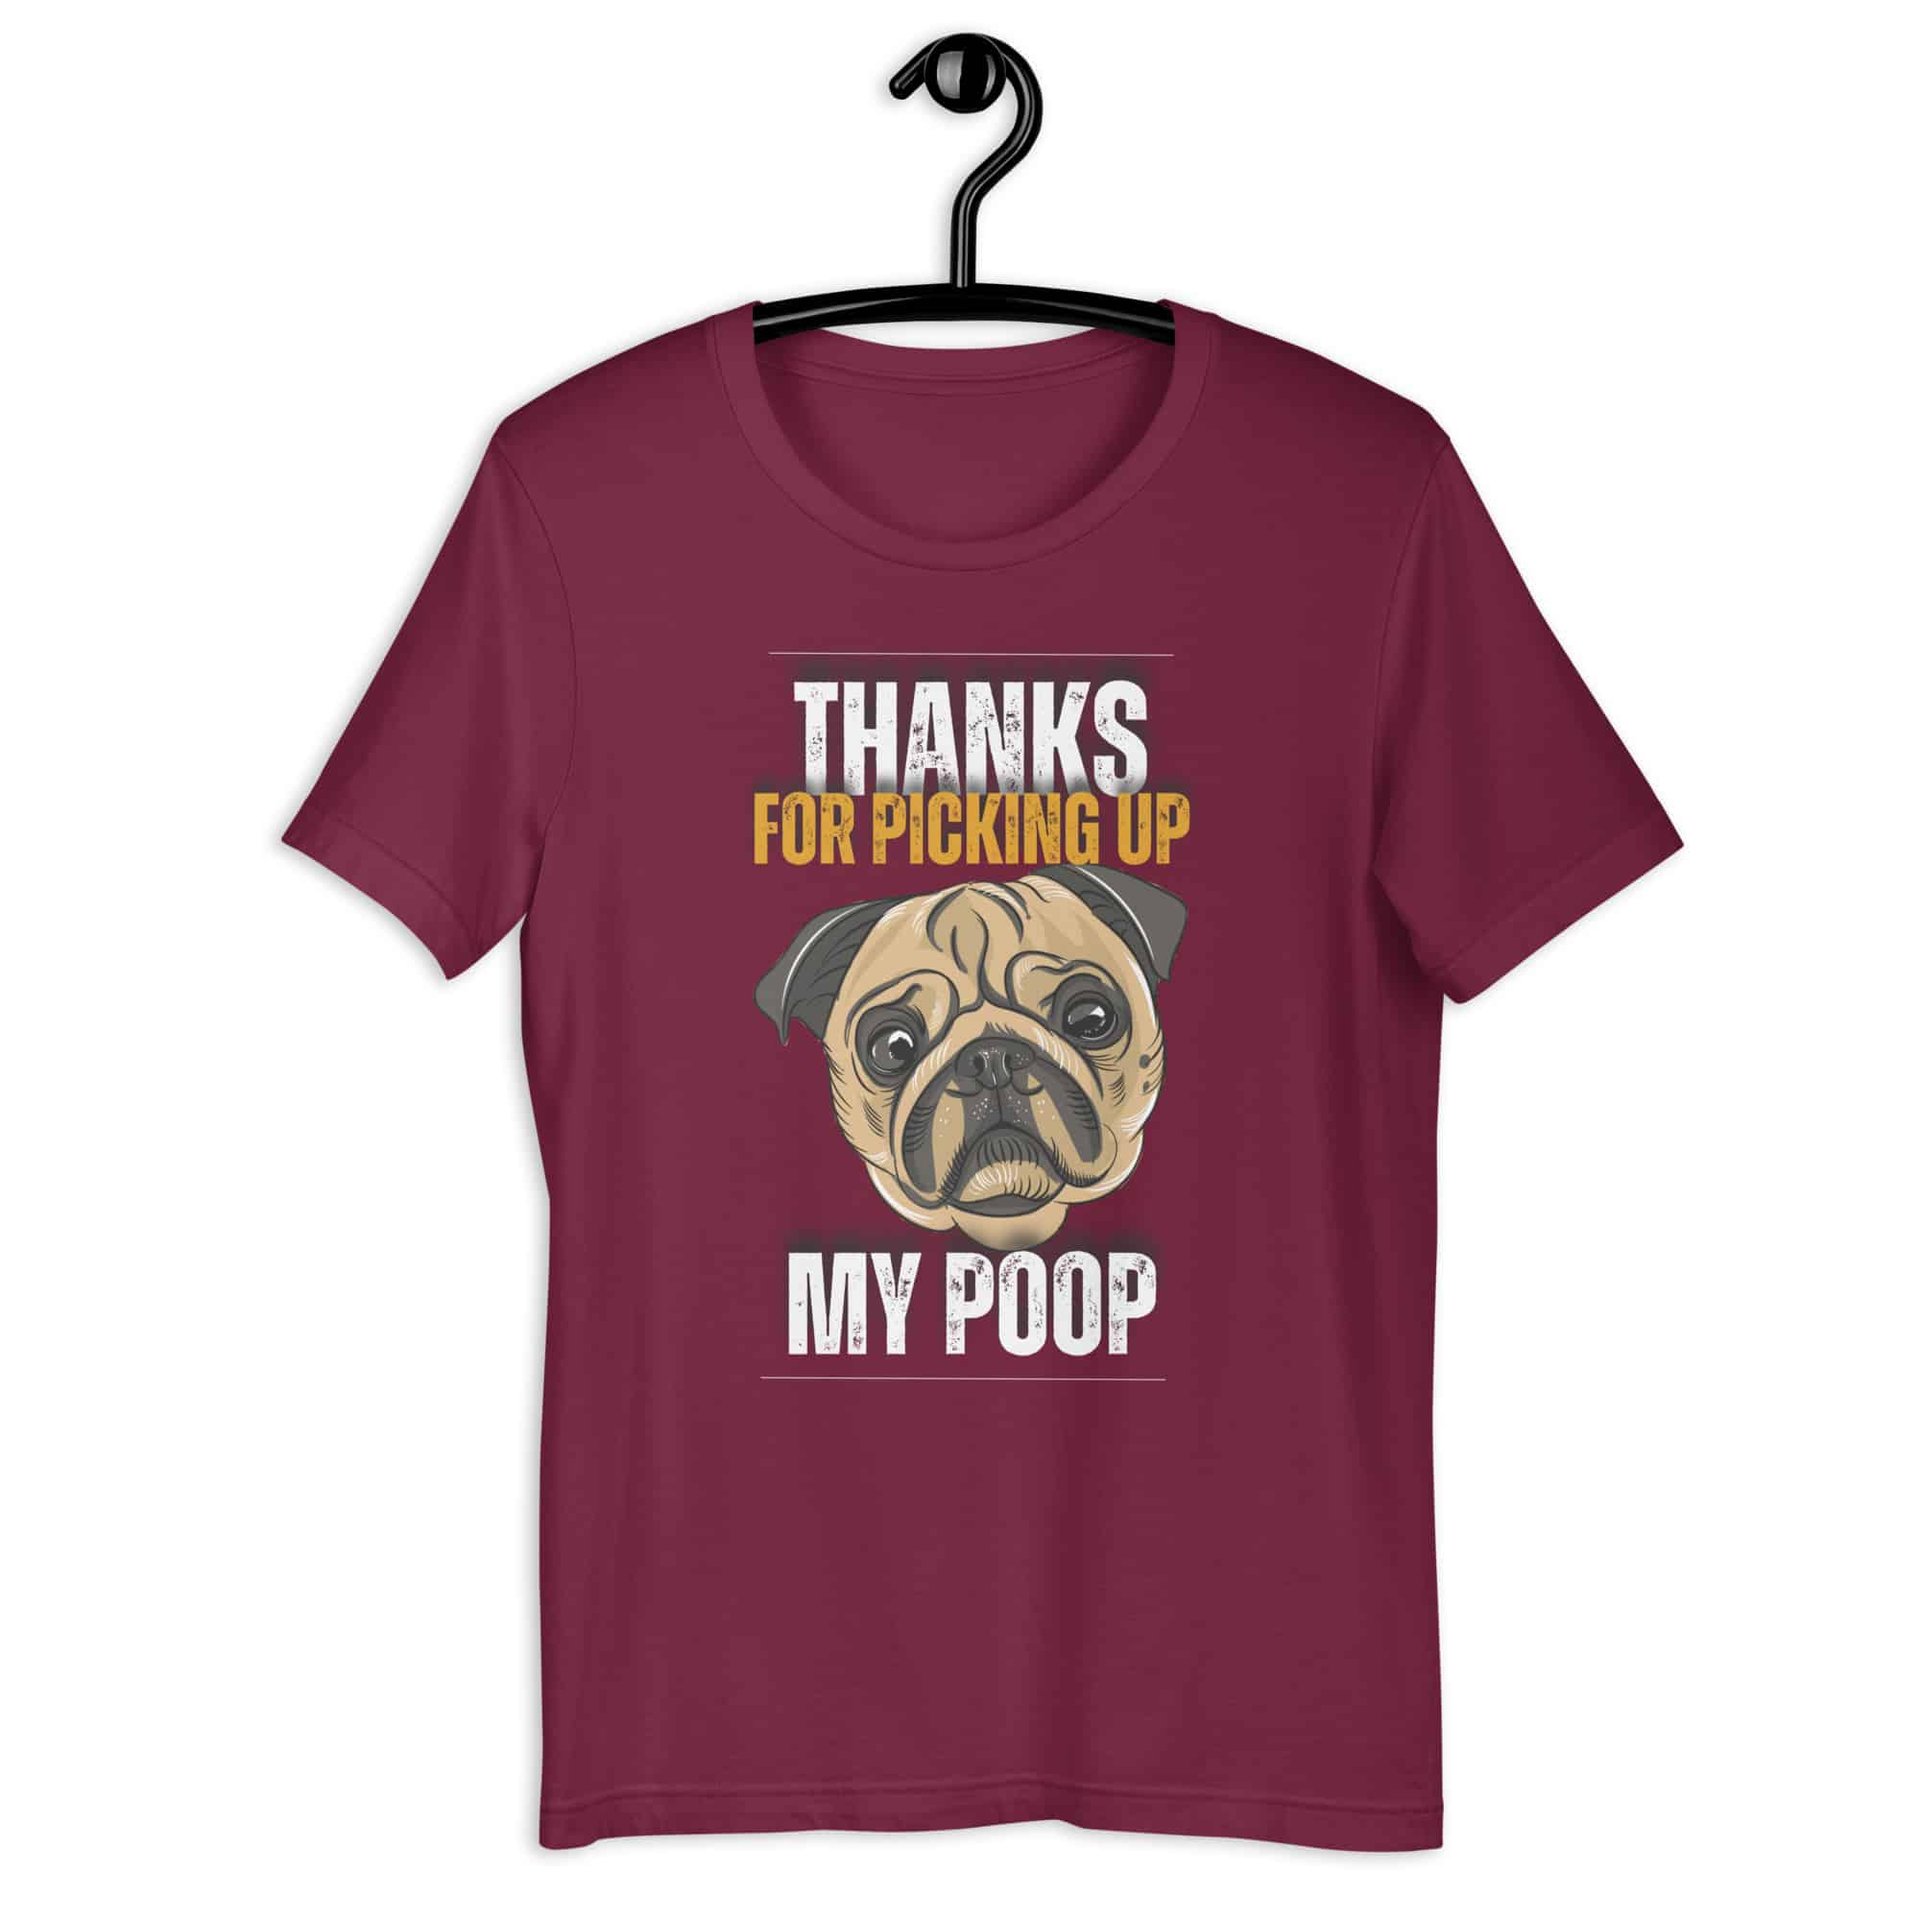 Thanks For Picking Up My POOP Funny Bulldog Unisex T-Shir. Maroon